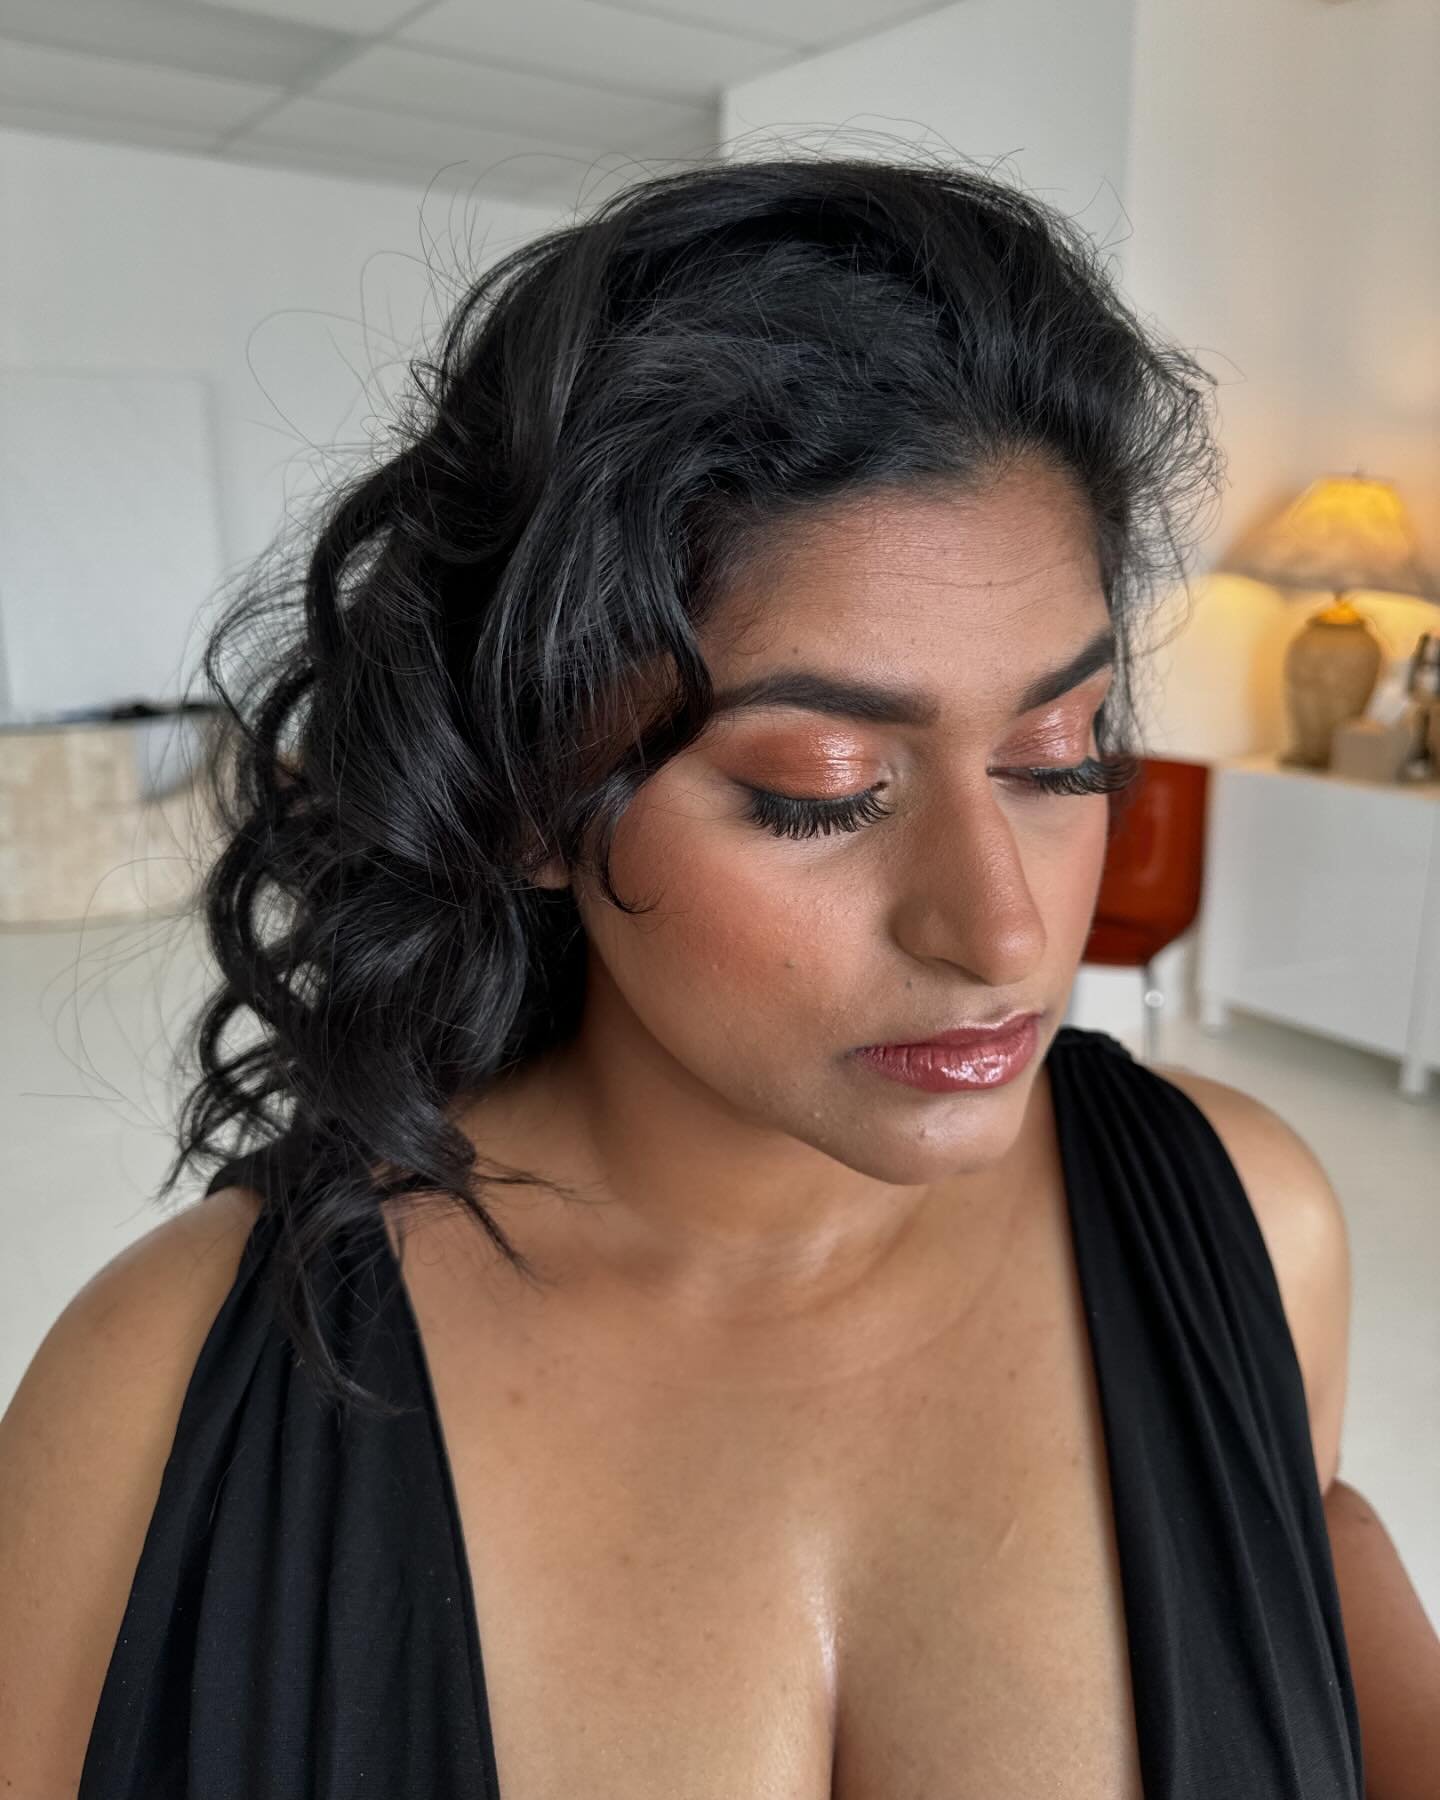 Stunning Bronzed Beauty. The stunning @kimberly.dsouza 

This stunning look was inspired by glowy and glossy. We added a little something extra on the eyelids to get the ultimate shine. Body Glow is a must! Hair was so done by me. 

#makeupartist #ma